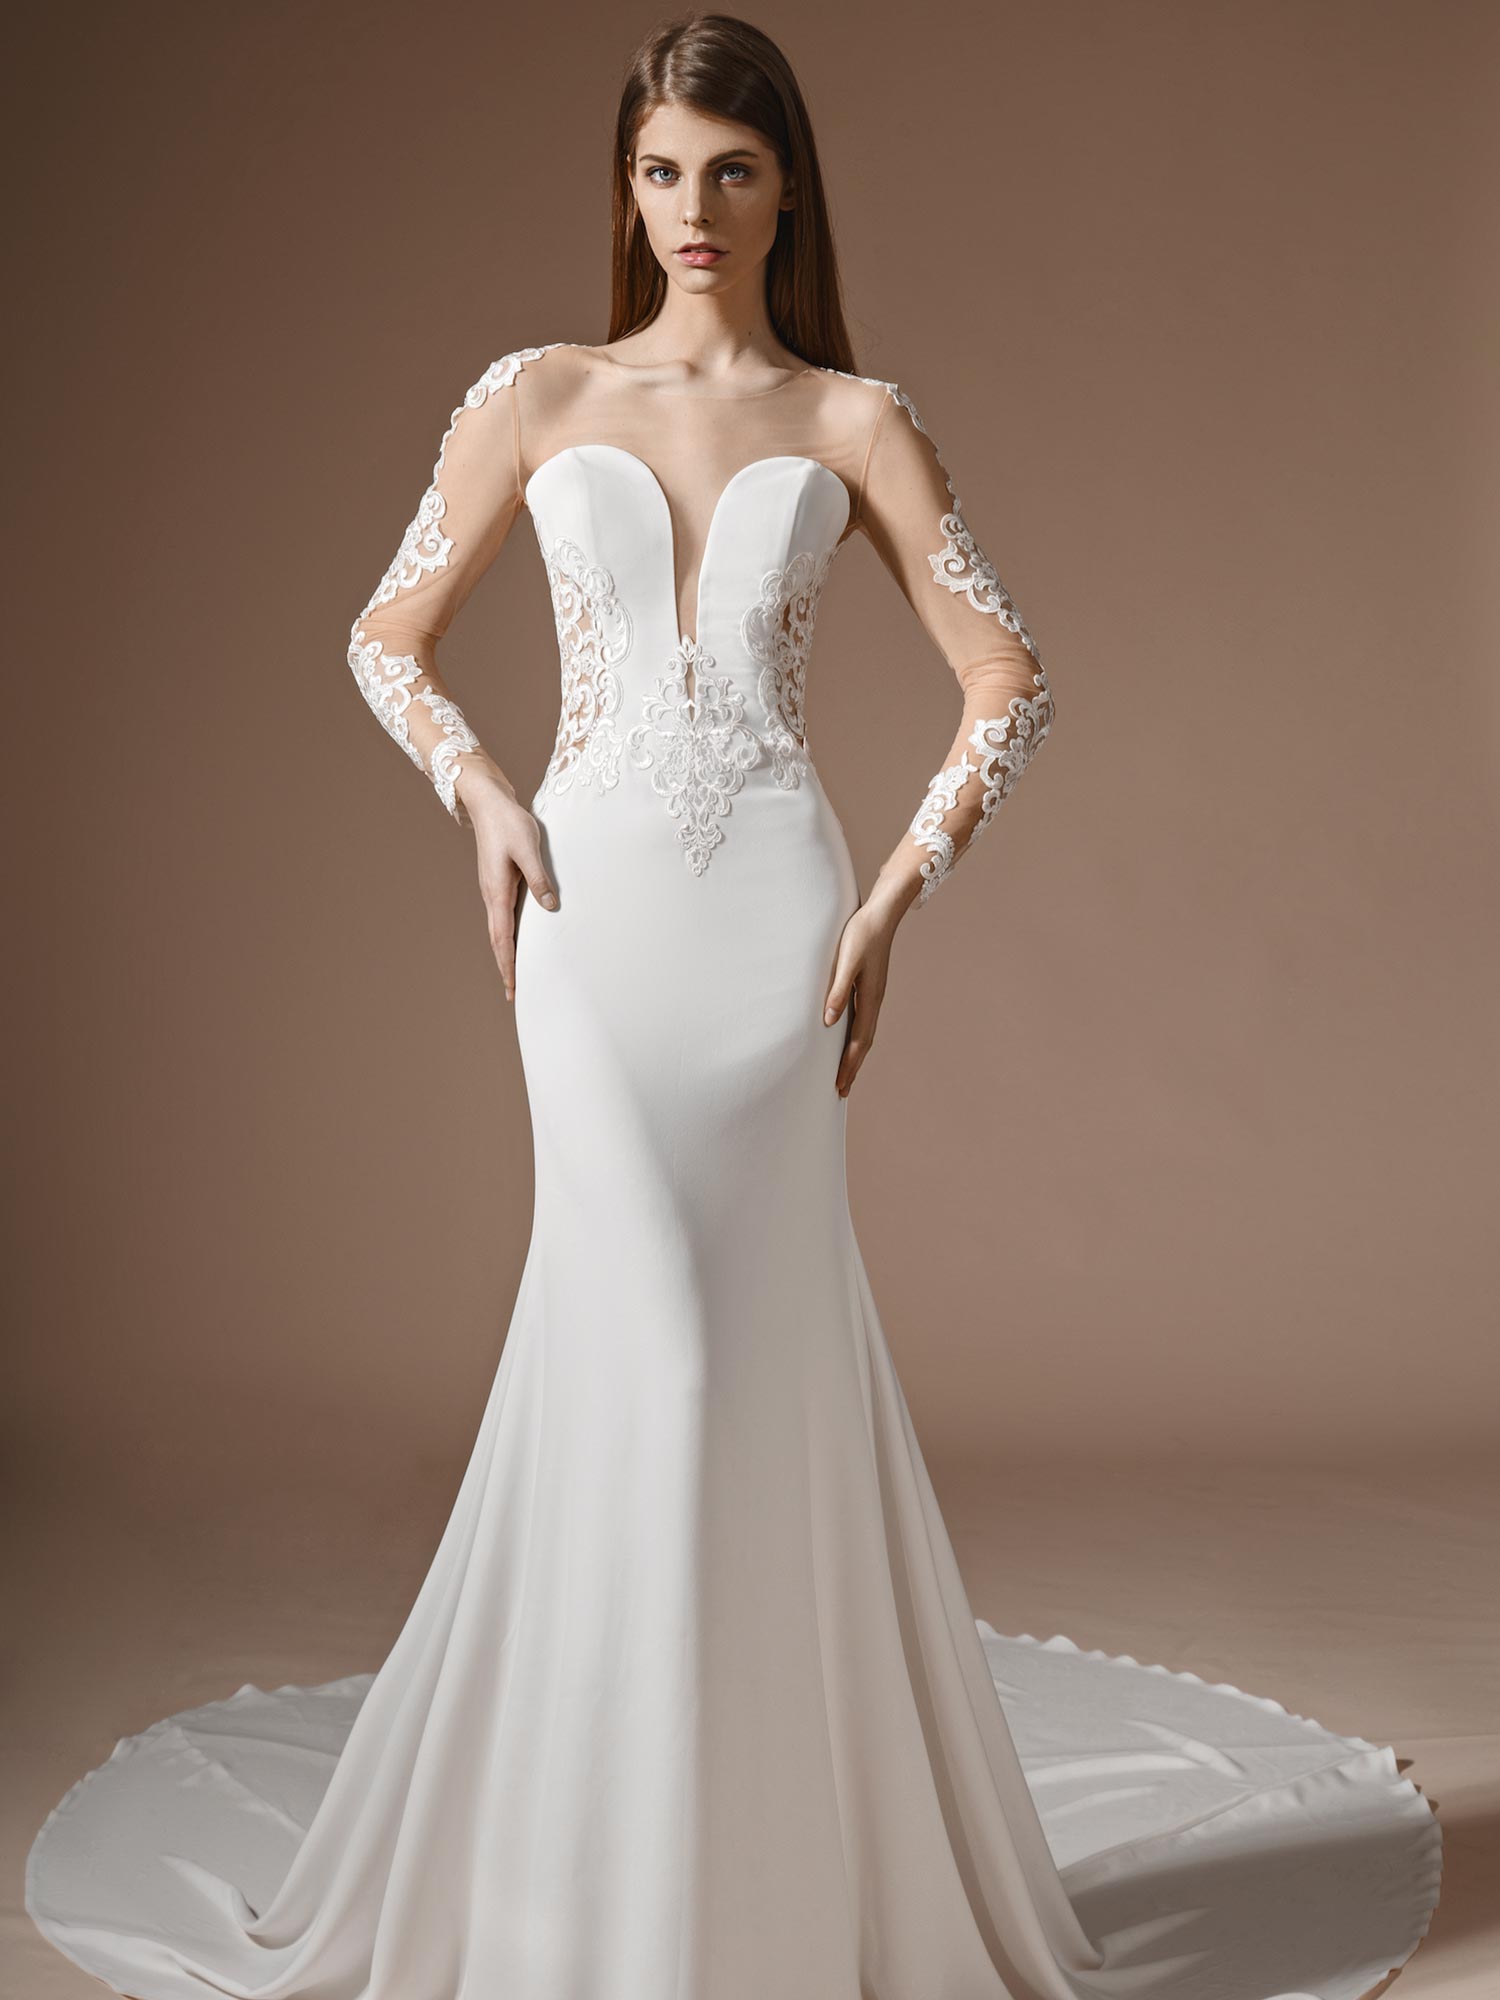 Papilio Fit and flare style wedding dress with illusion neckline and ...